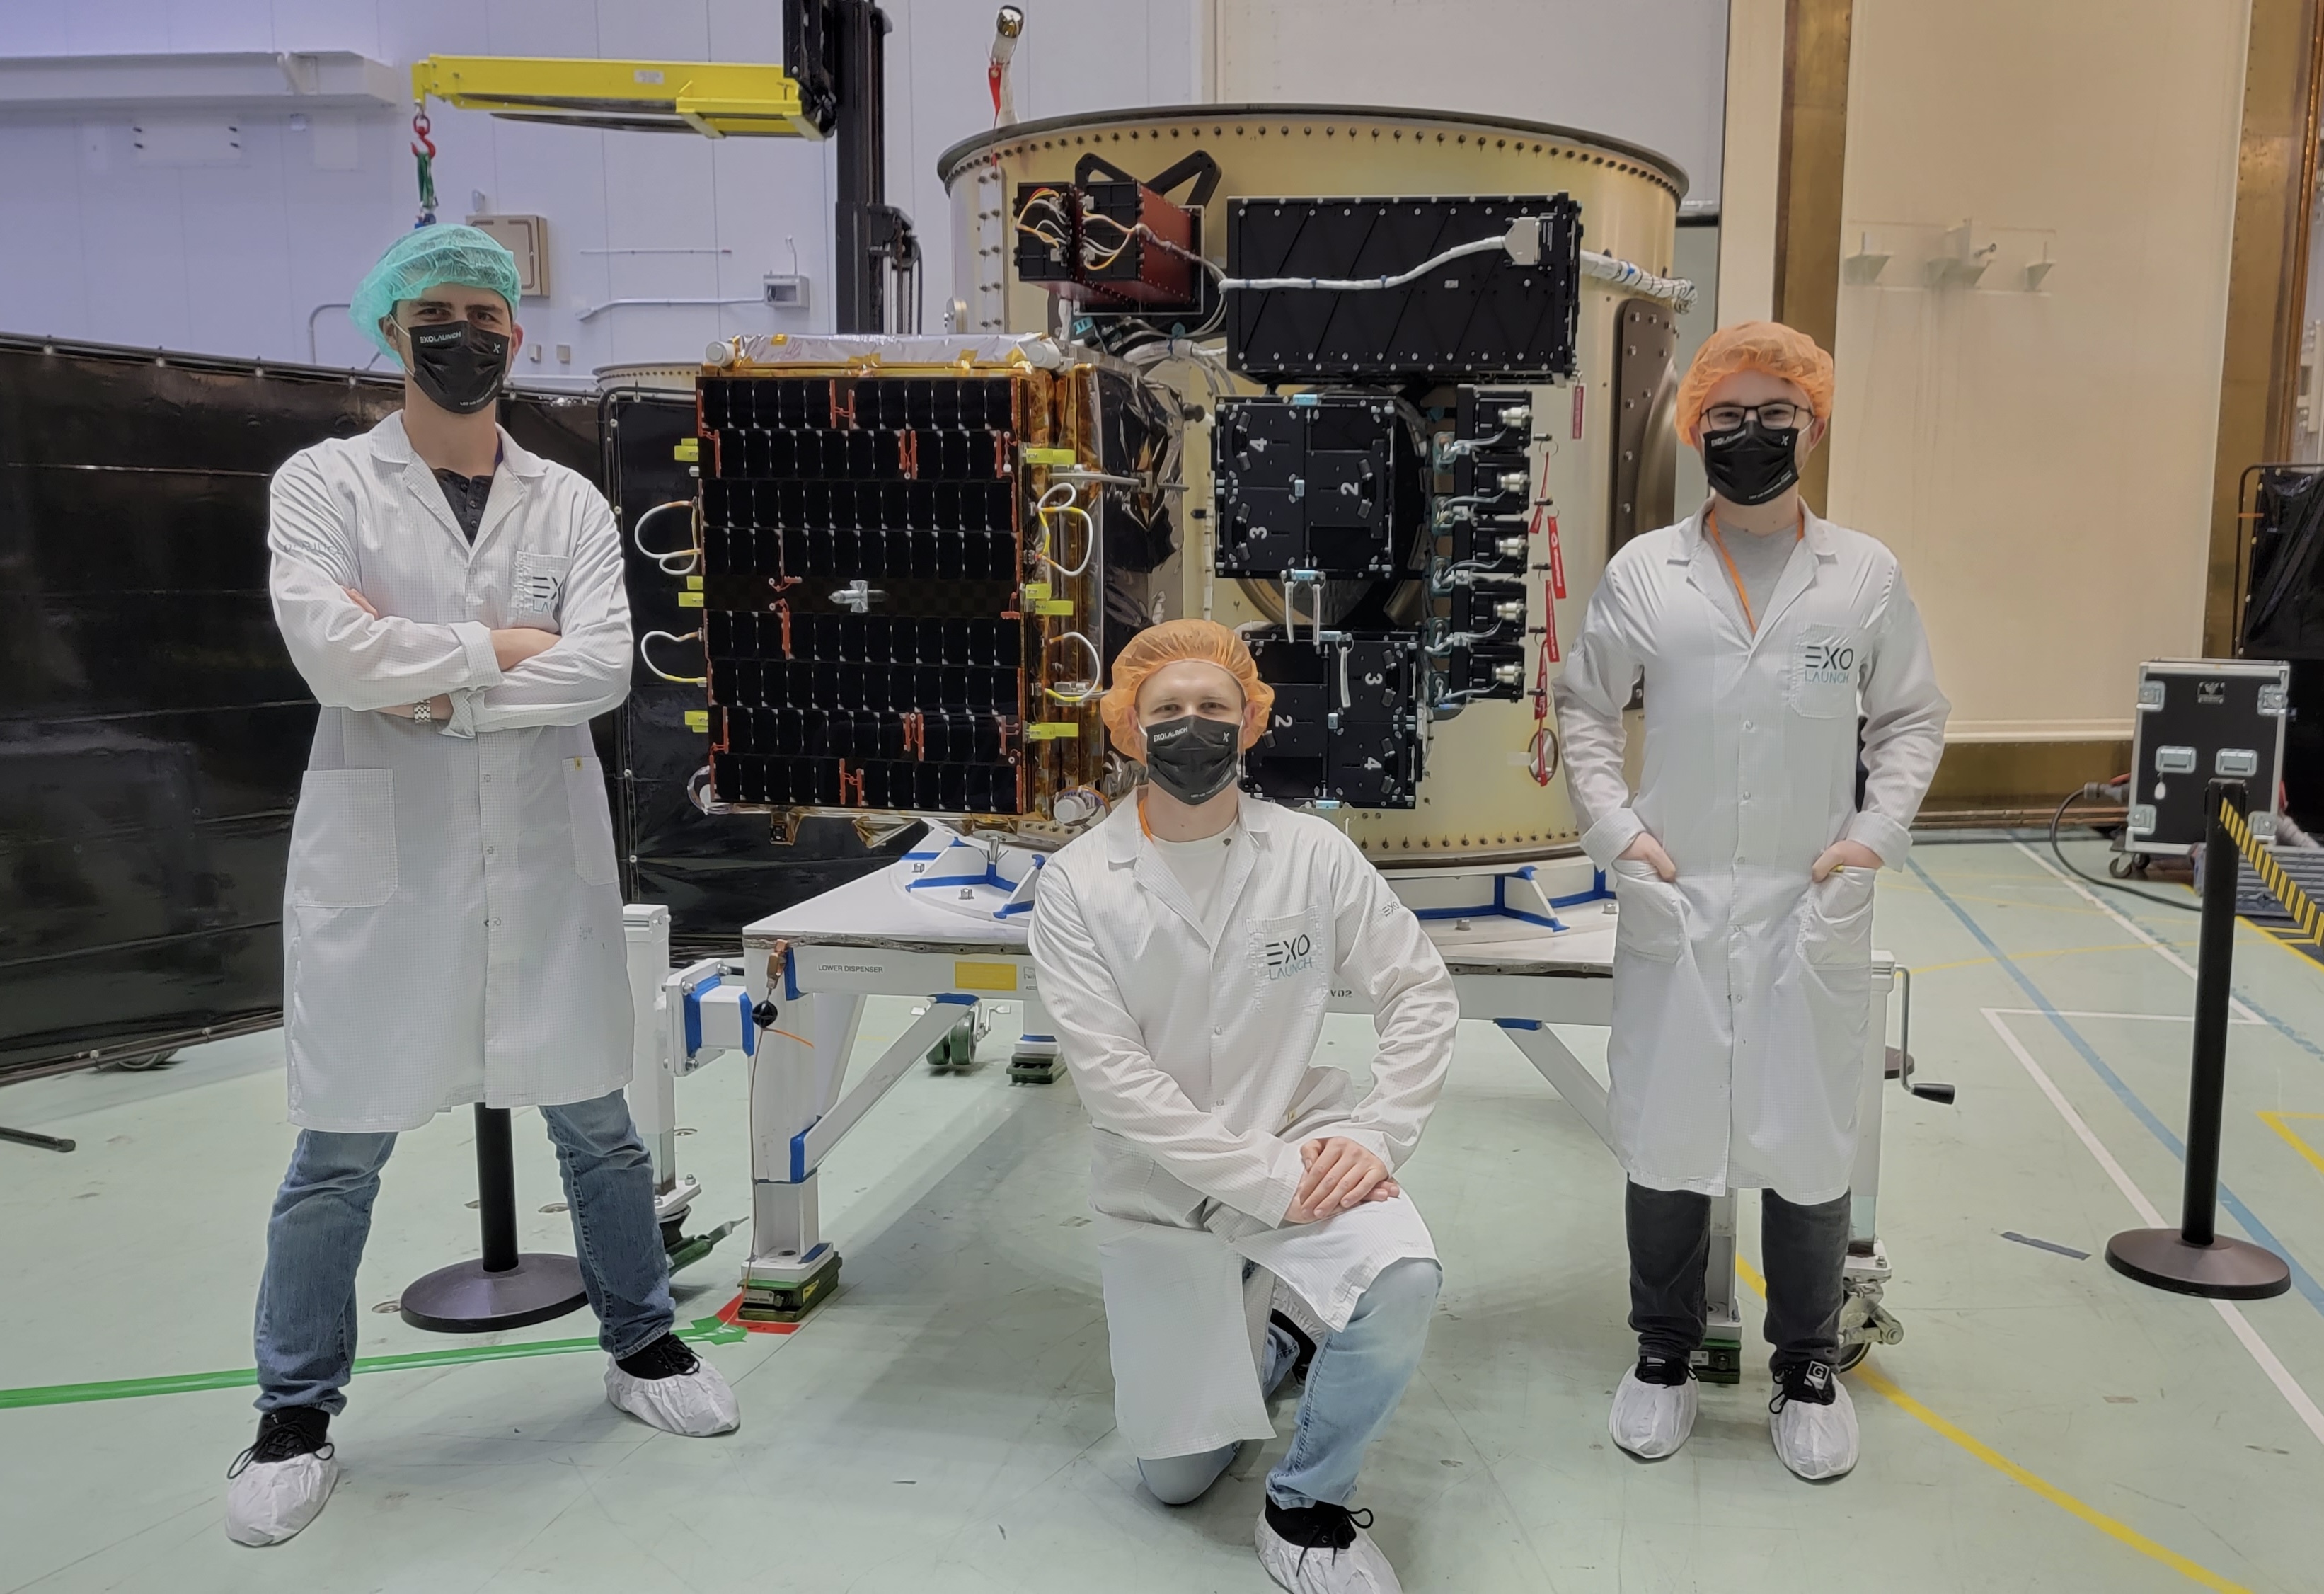 The Exolaunch team during the integration of satellites before take-off, the ICEYE microsatellite is visible from the front (Source: Exolaunch / SpaceX)